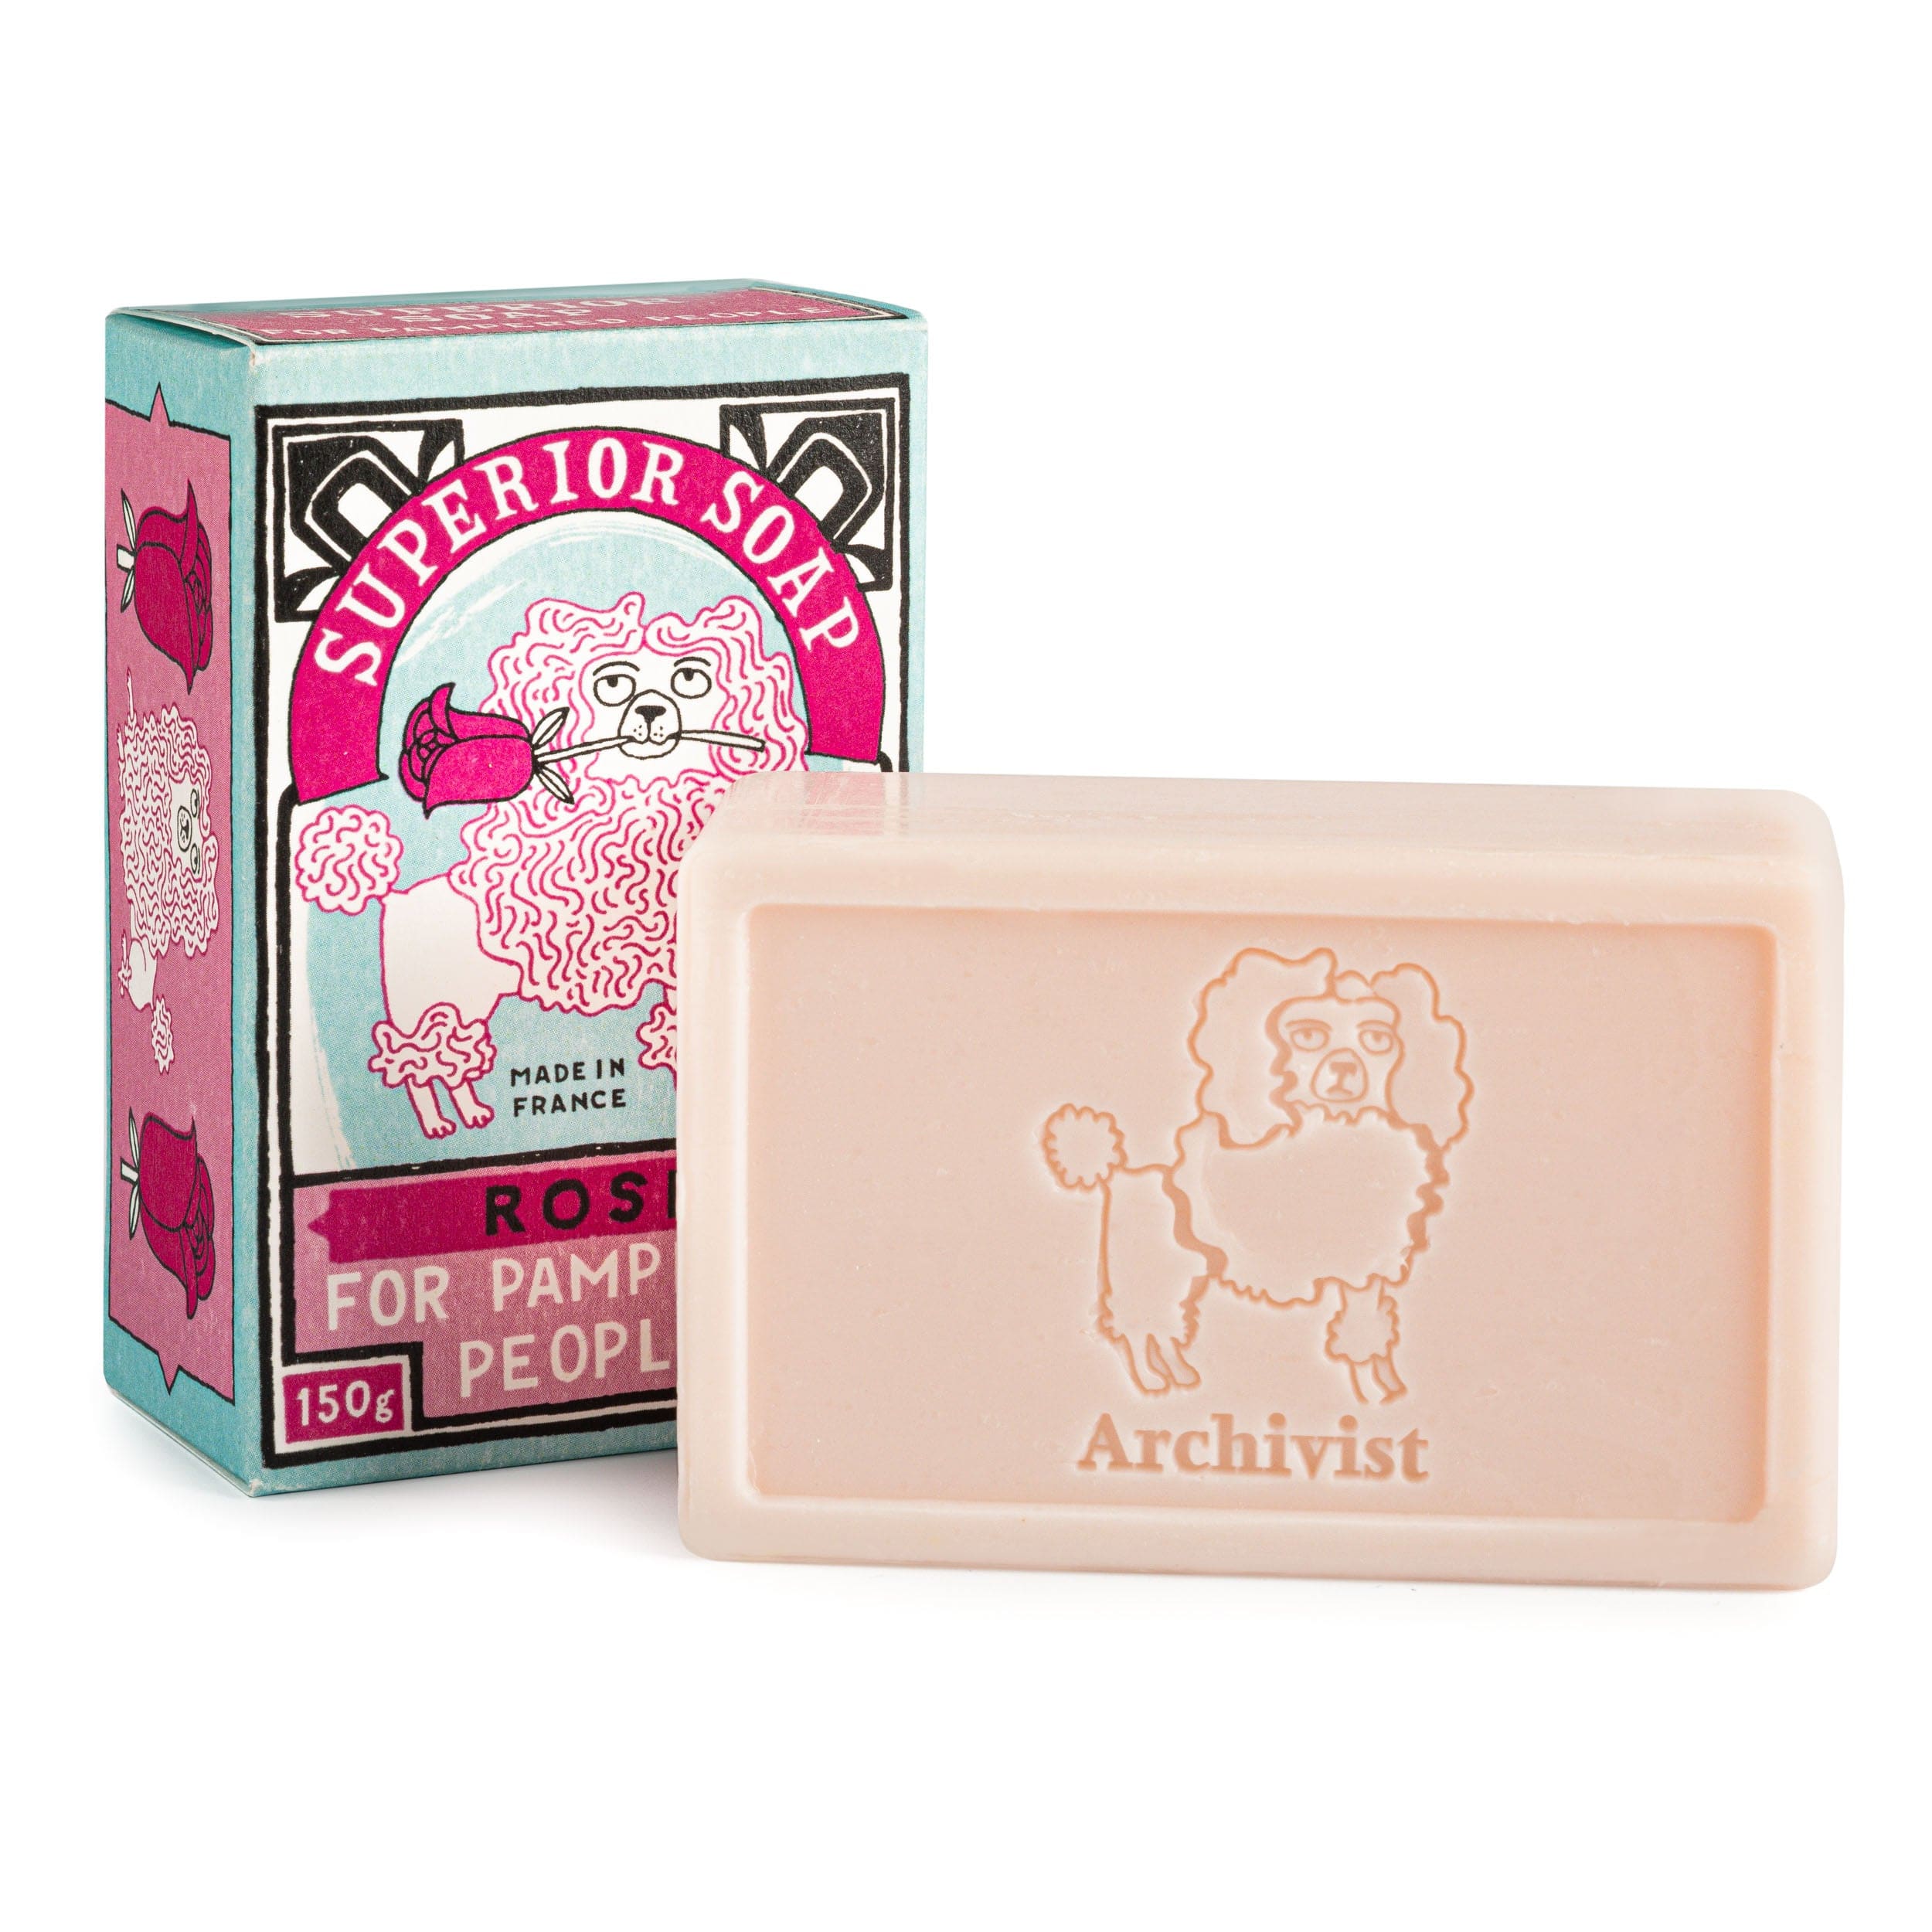 Rose Hand Soap in a Poodle Design Box